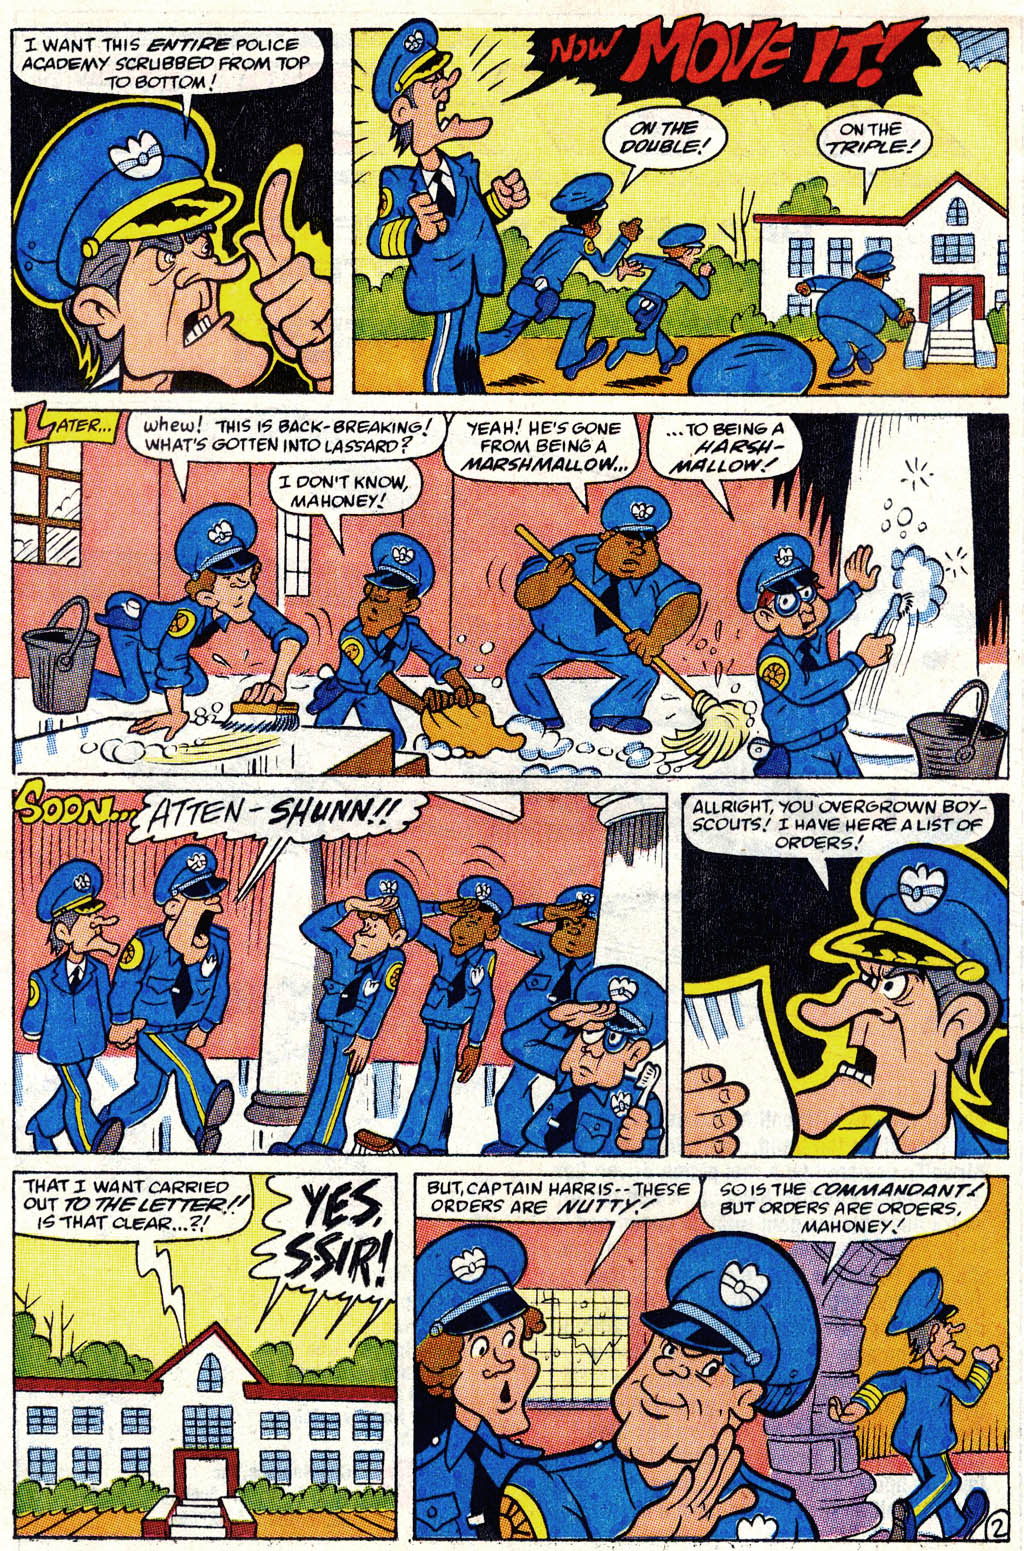 Read online Police Academy comic -  Issue #2 - 18